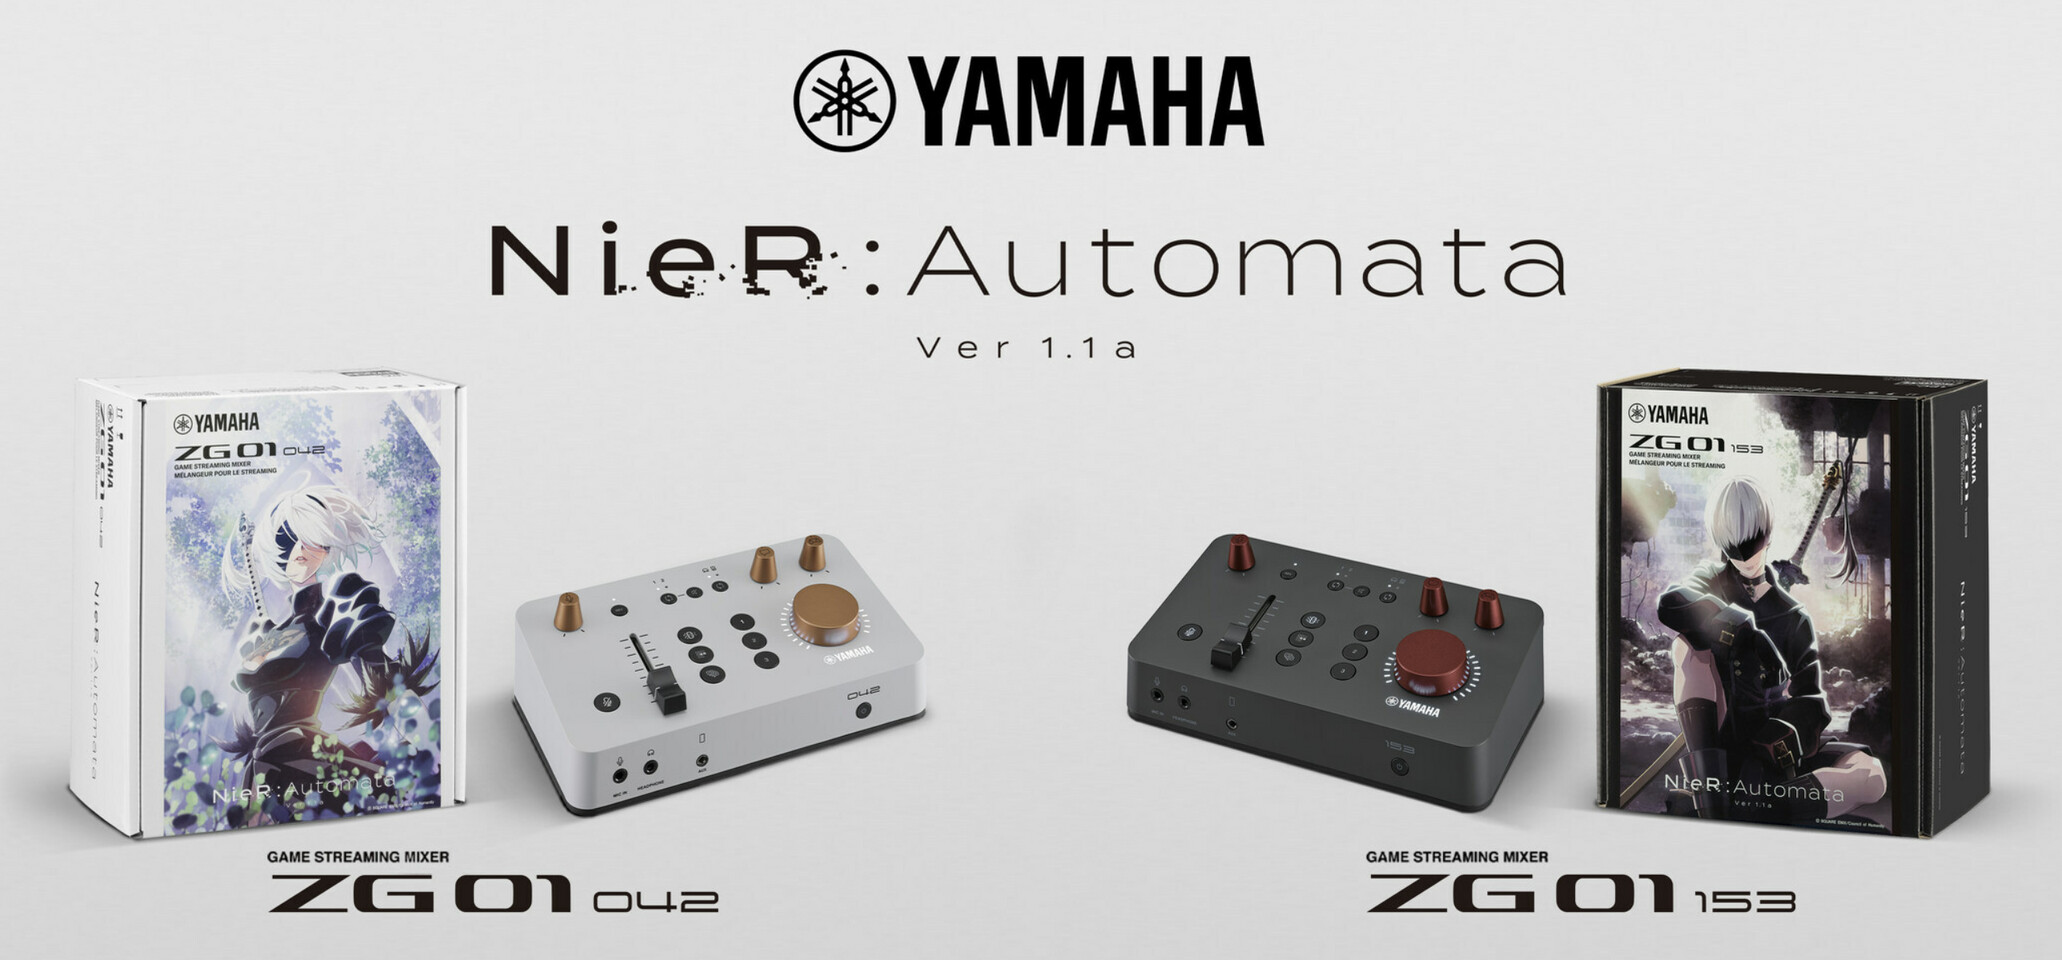 Yamaha Introduces Limited-Edition, Anime-Inspired ZG01 Gaming